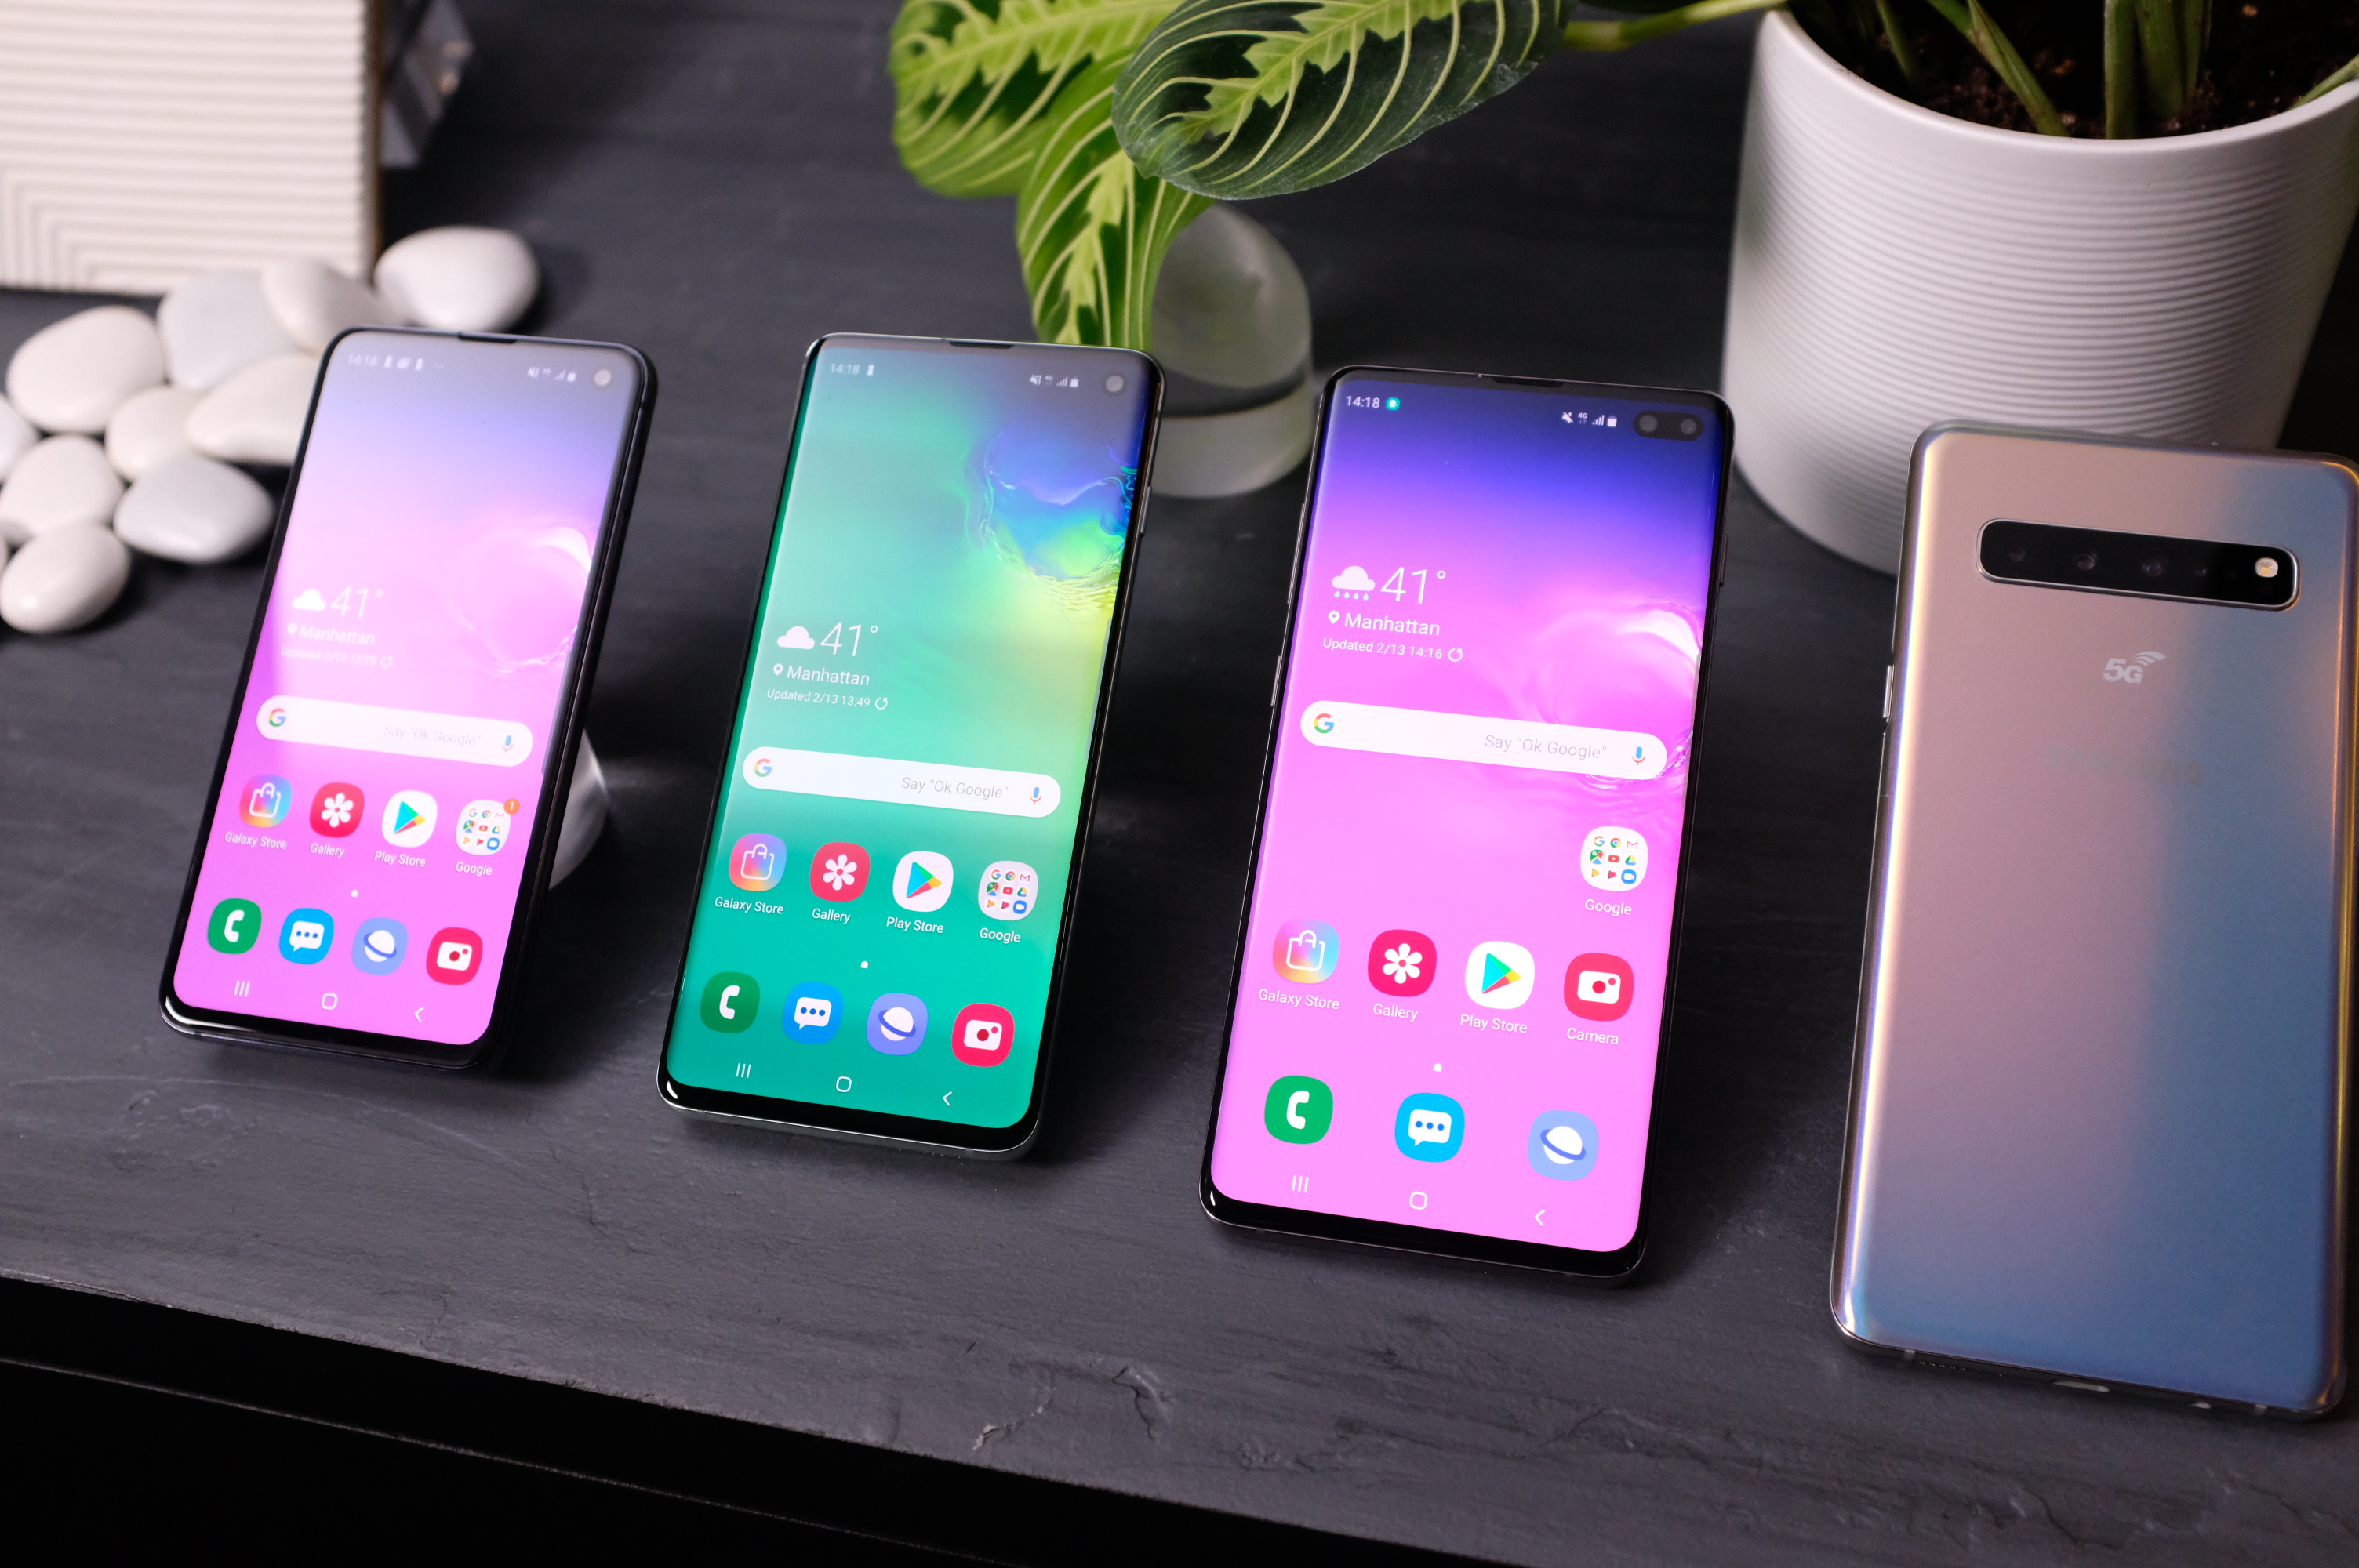 Samsung S Galaxy S10 Lineup Arrives With Four New Models Techcrunch